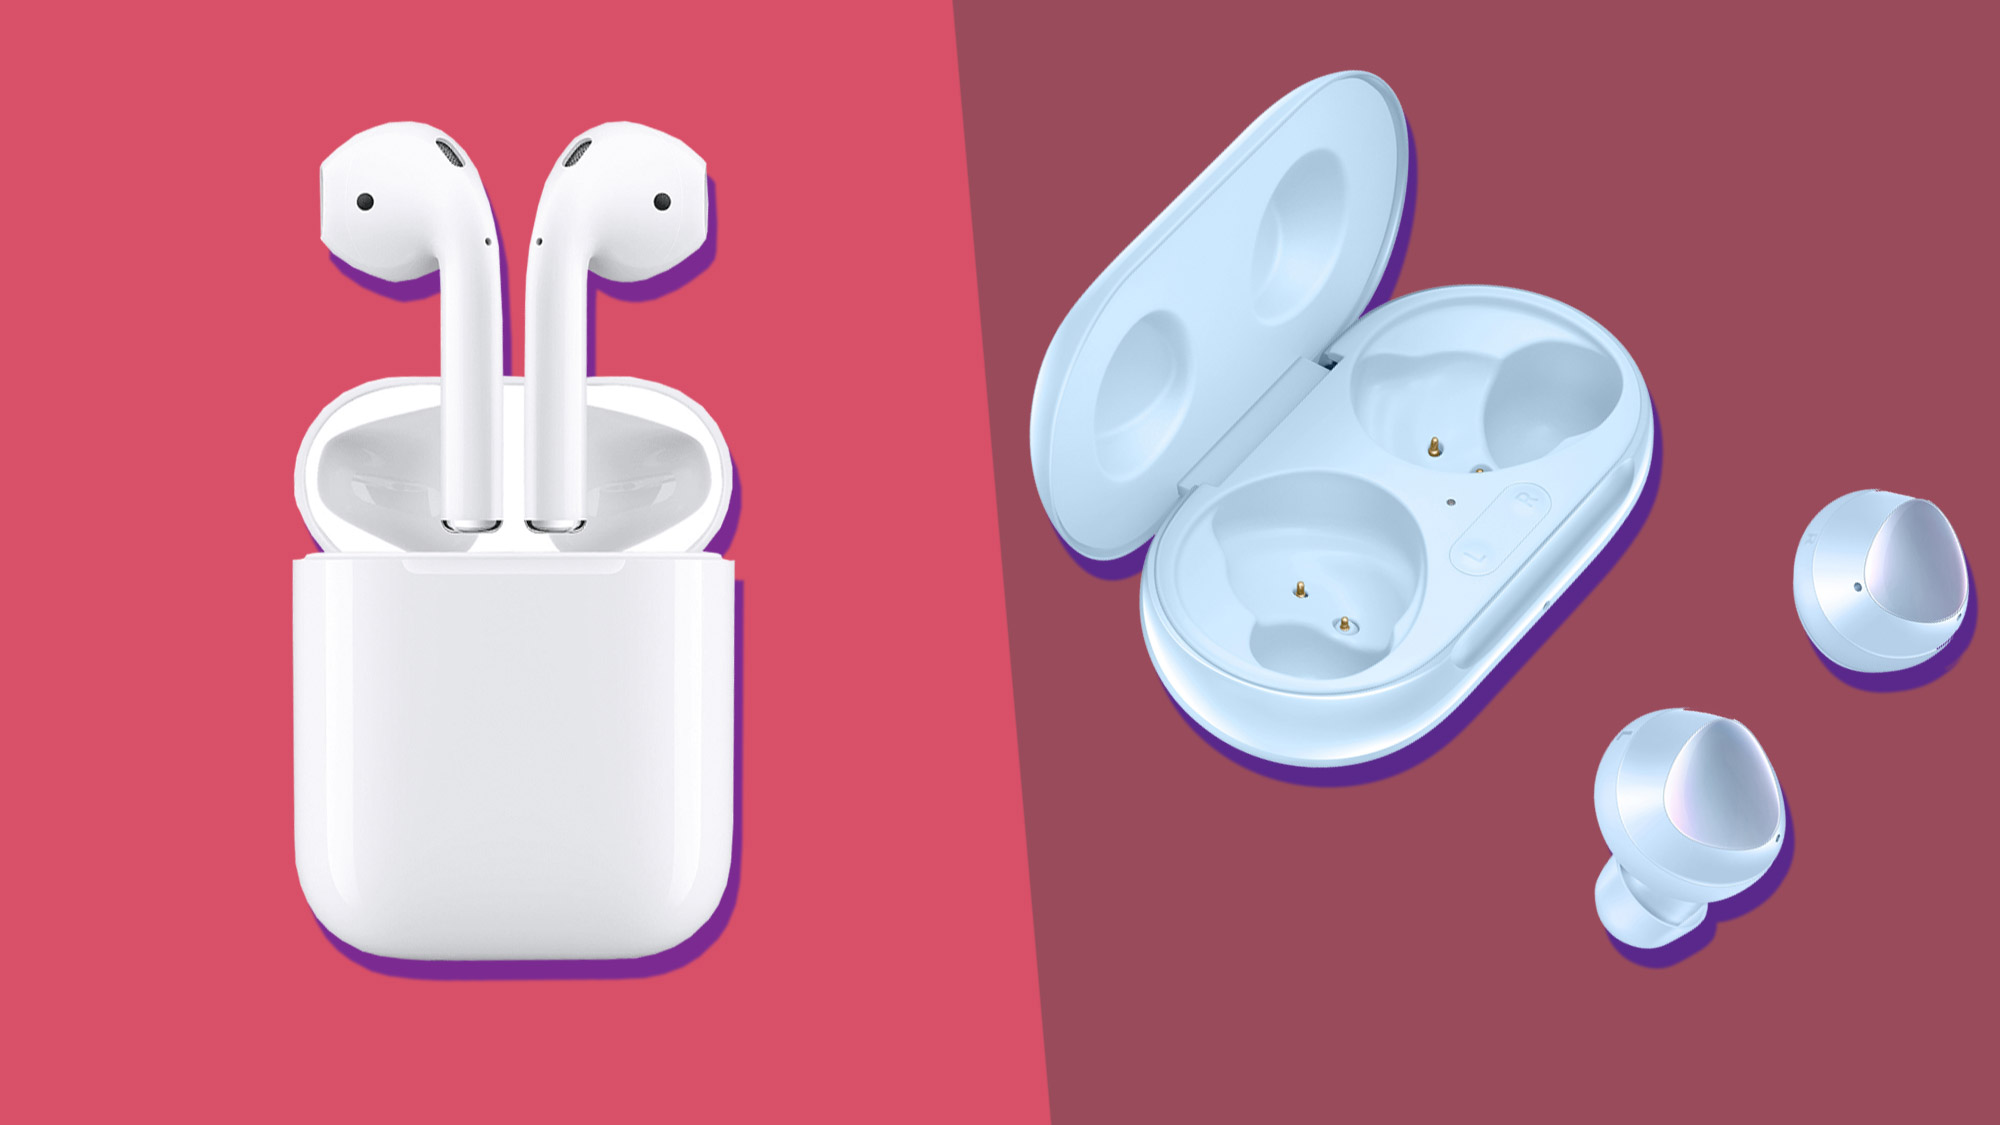 Airpods pro samsung. AIRPODS Samsung Galaxy. Samsung Buds 2 Pro vs AIRPODS Pro 2. Galaxy AIRPODS 2. Samsung Buds vs AIRPODS.